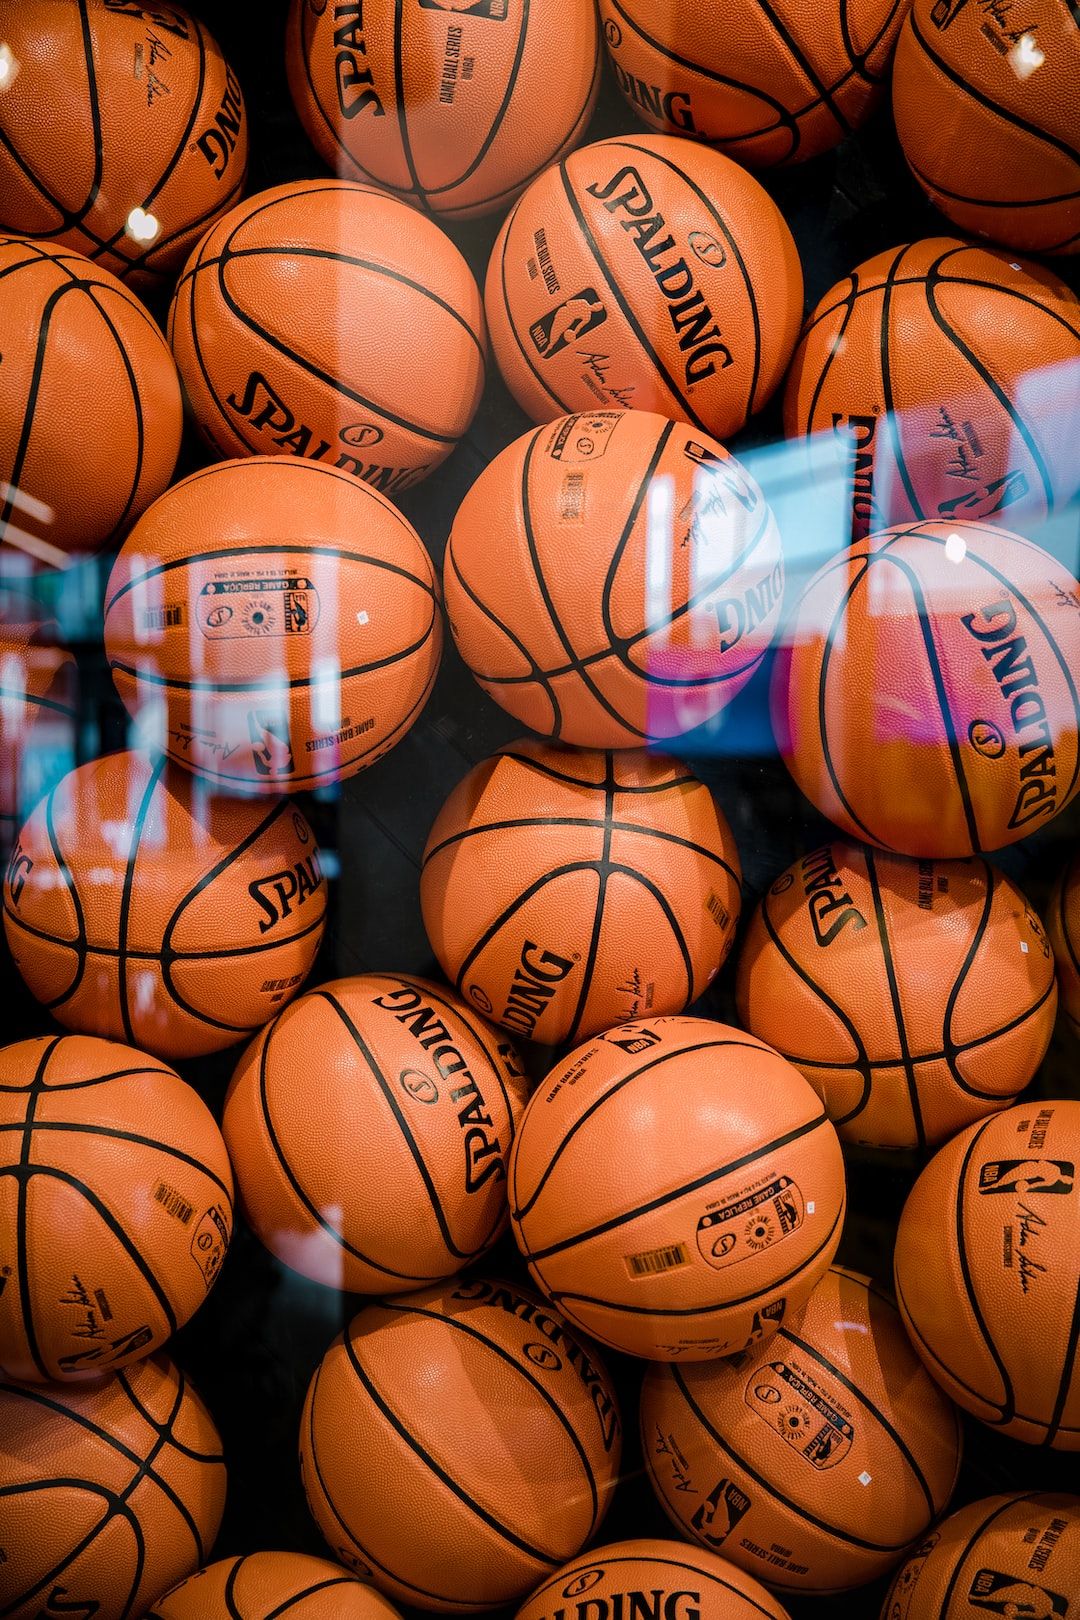 A bunch of basketballs are in the display - Basketball, NBA